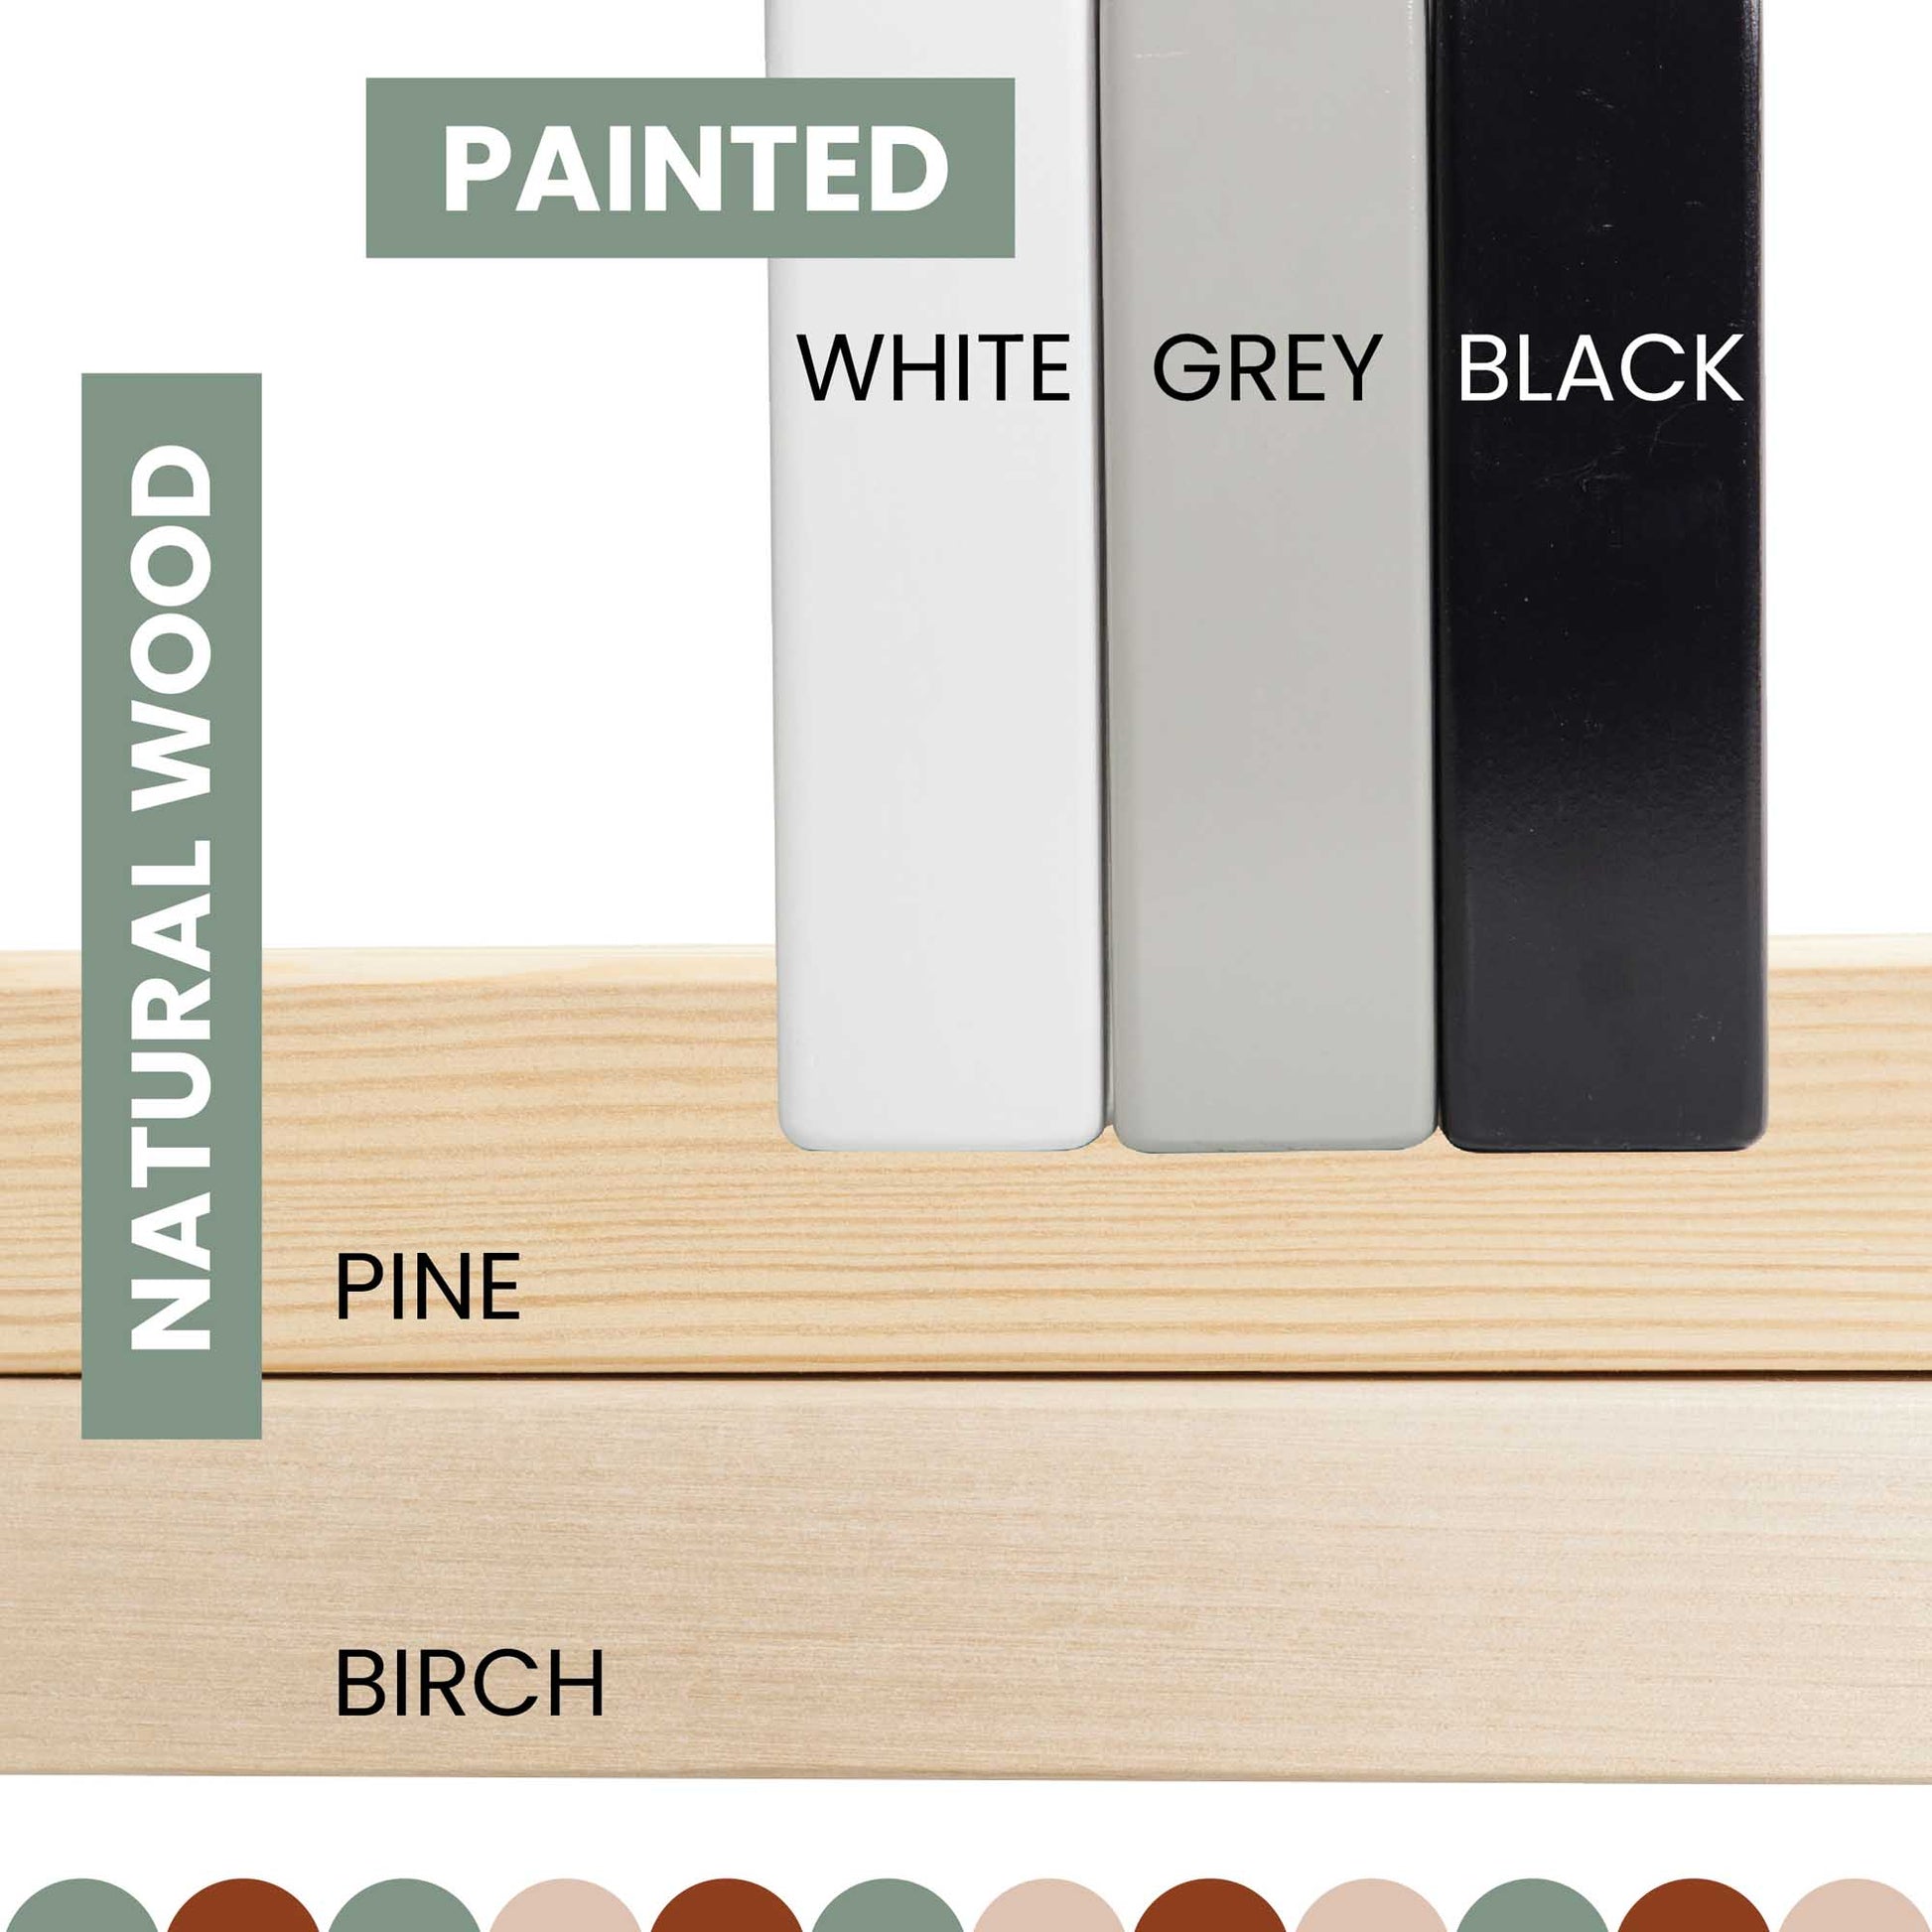 The paint colors for pine, birch, and white on a wooden house bed on legs.